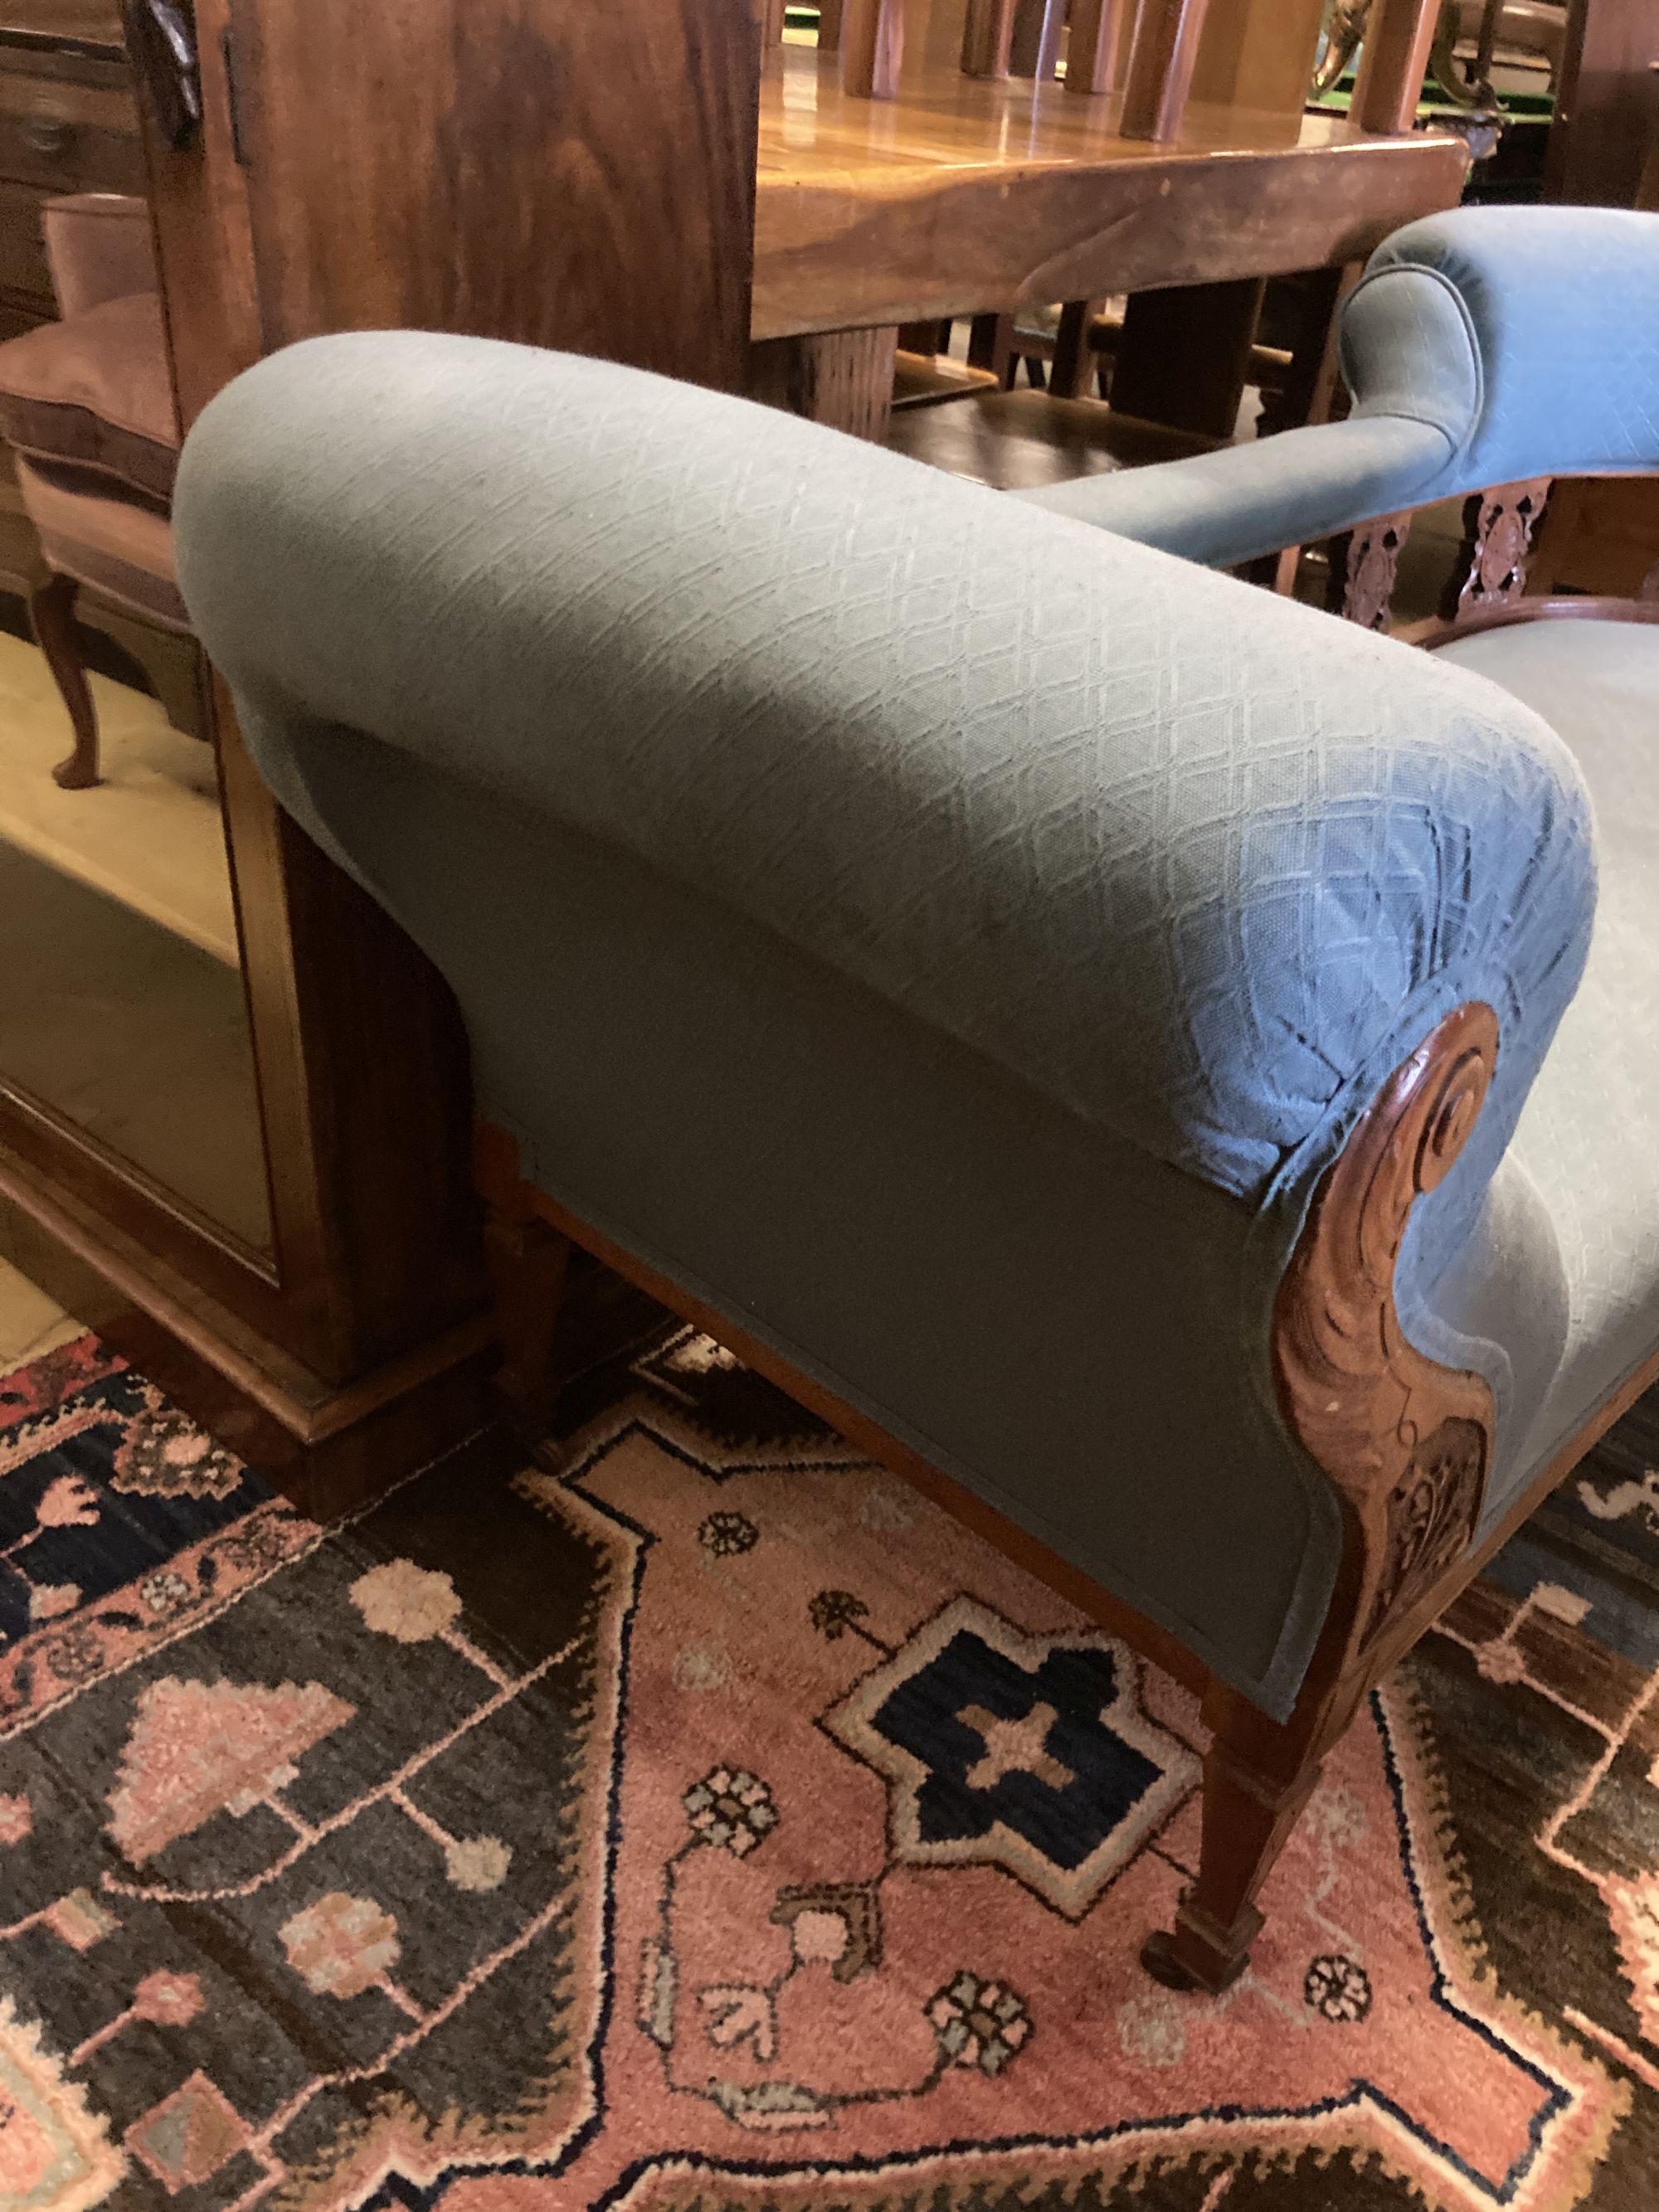 A late Victorian upholstered chaise longue, length 170cm, depth 66cm, height 73cm